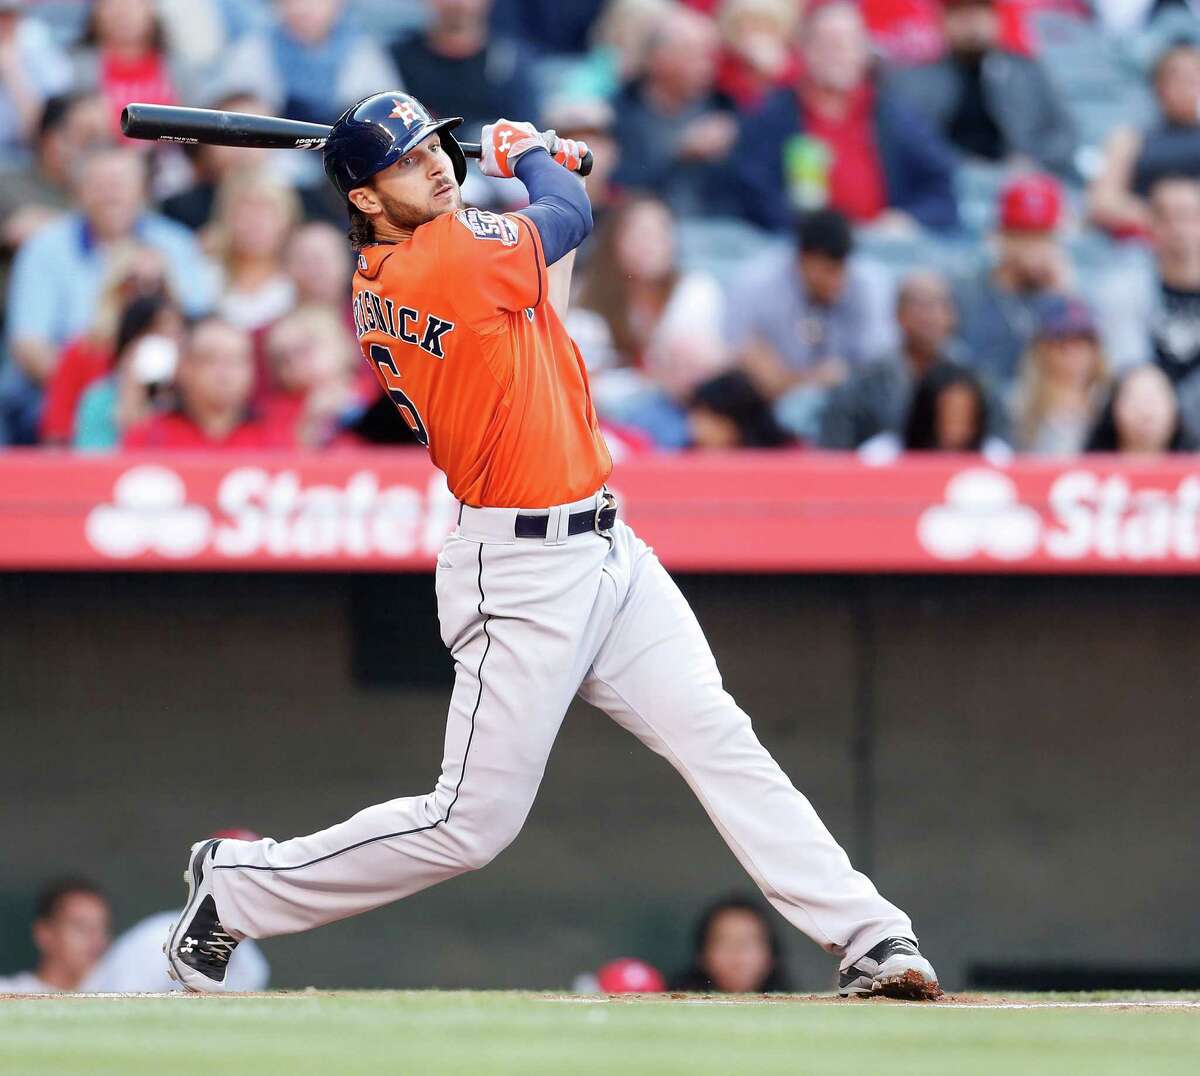 Jake Marisnick batted leadoff for the Astros for the first time this season﻿ Saturday, but the outfielder hit in the top spot for much of his minor league career.﻿